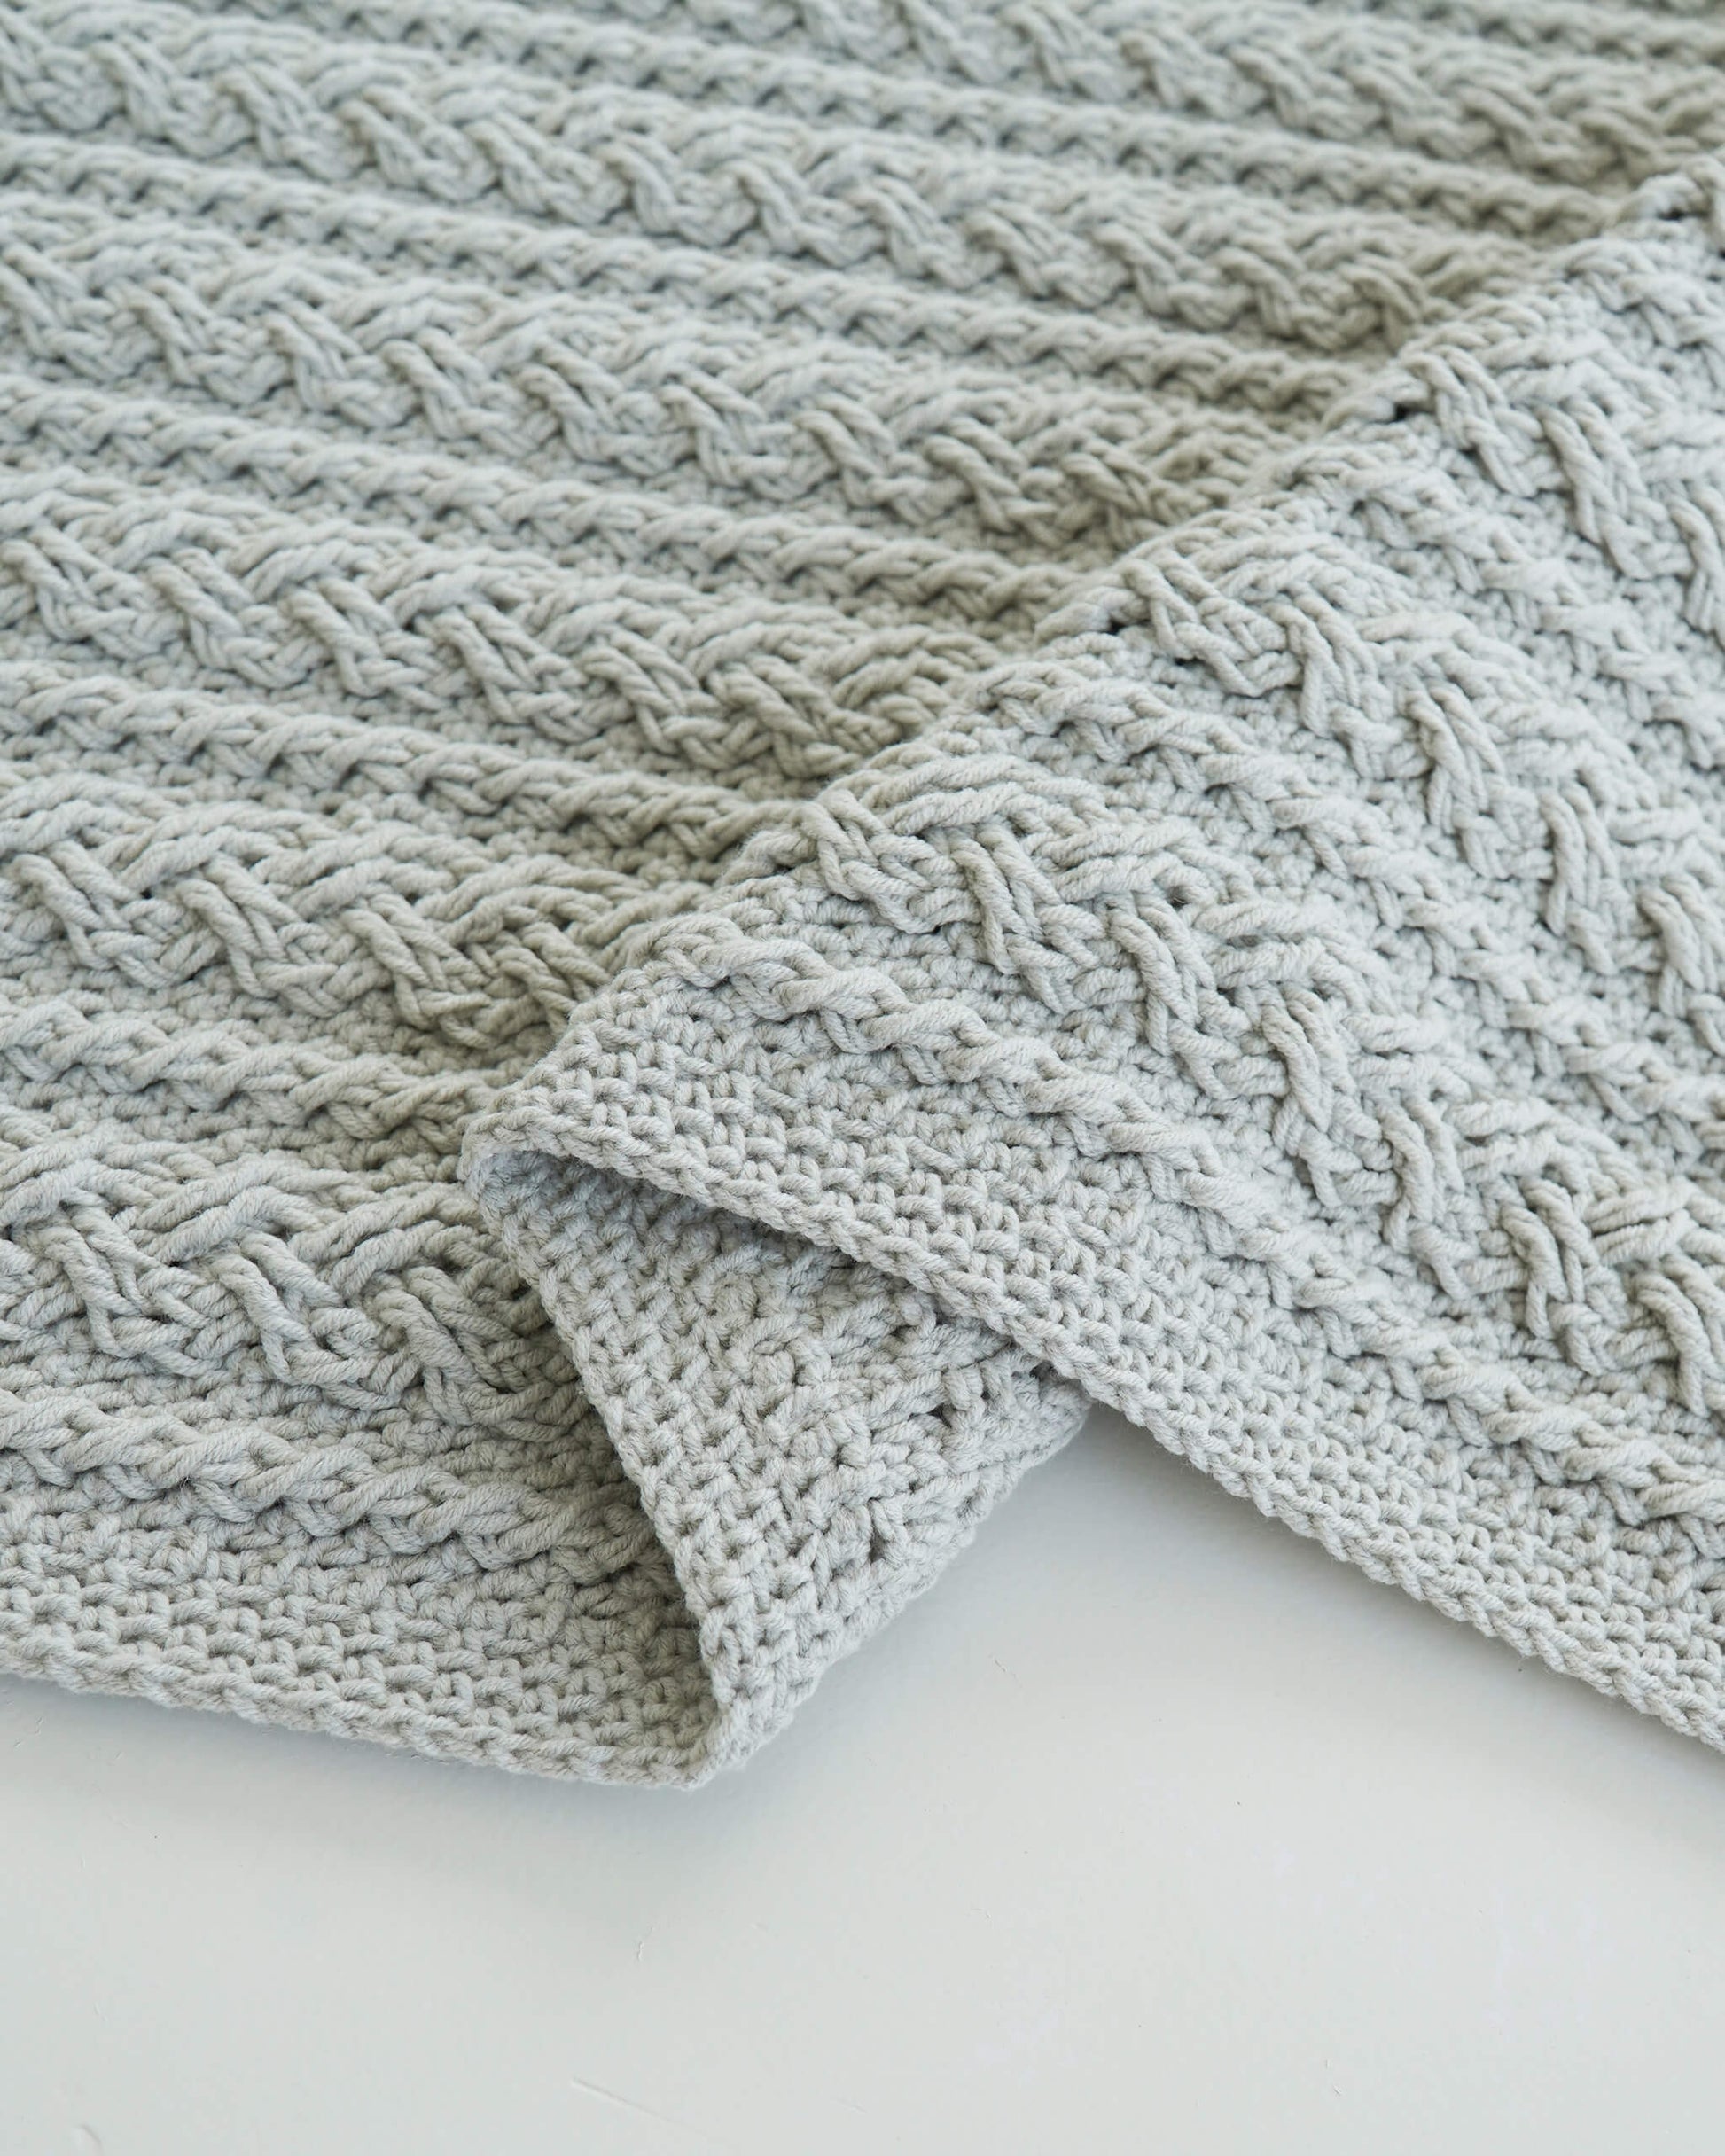 Cable blanket pattern | Video tutorial